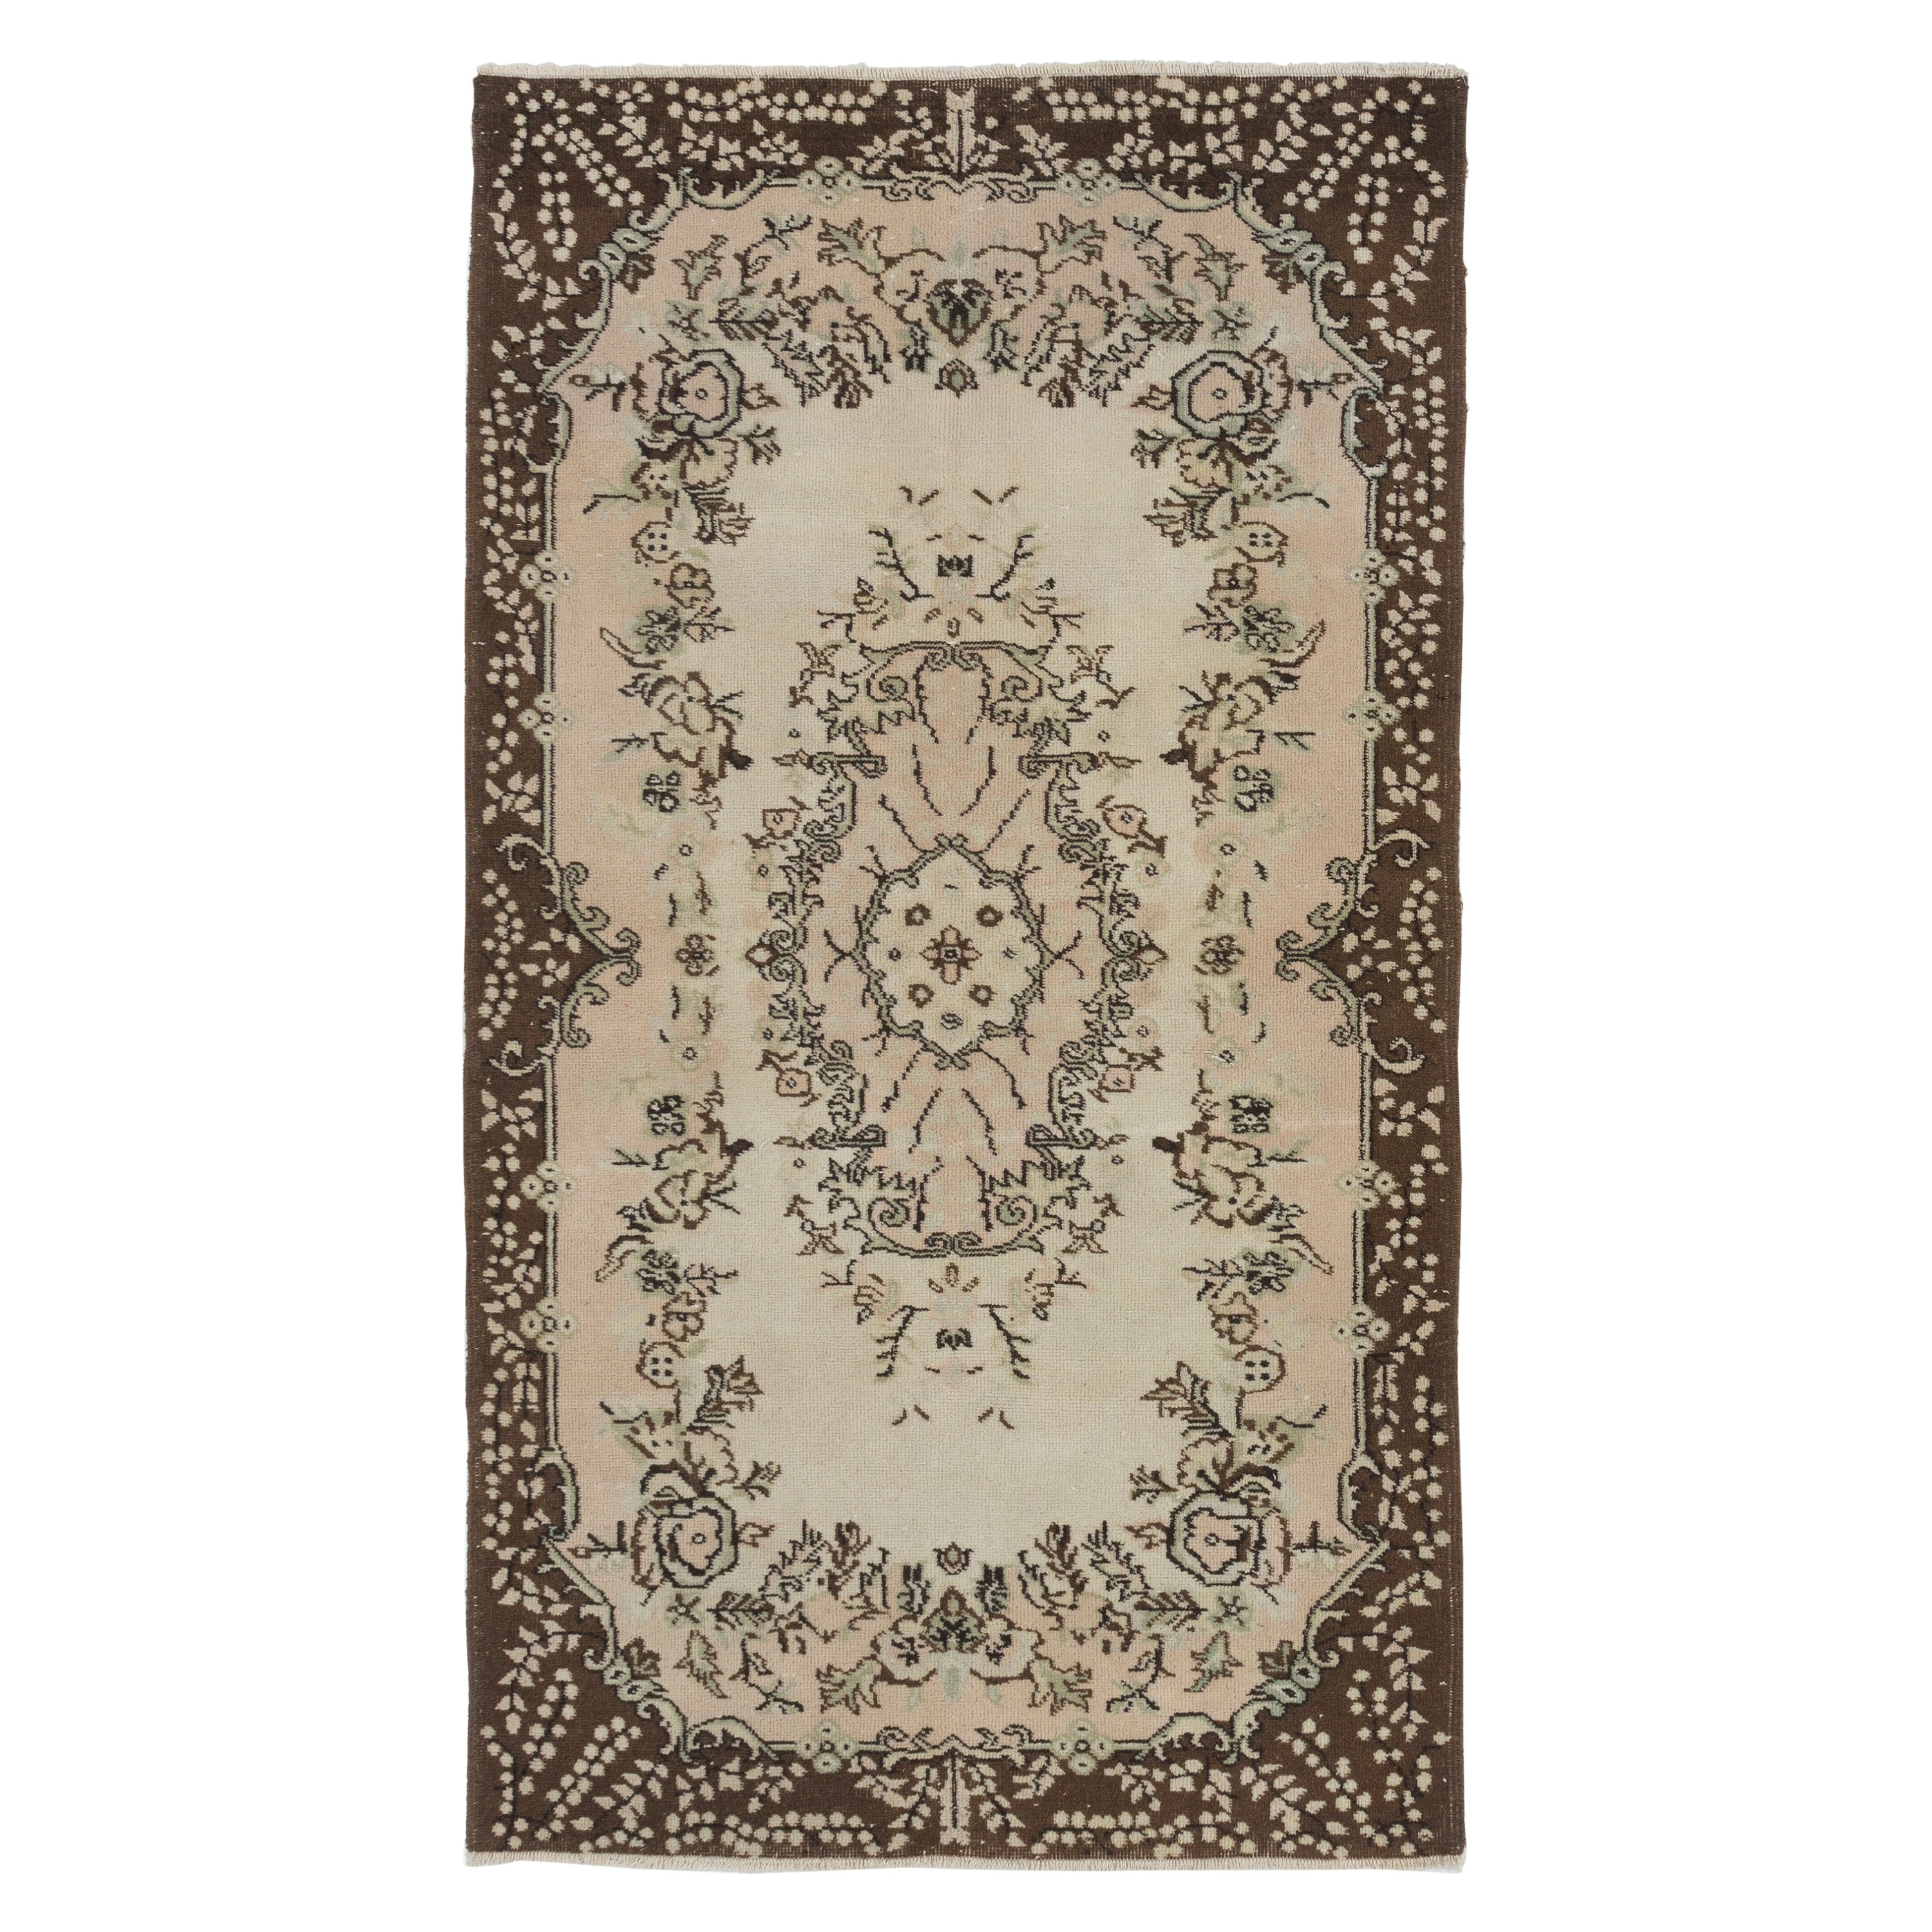 4x7 Ft Hand-Knotted Vintage Floral Garden Design Anatolian Accent Rug. ca 1960